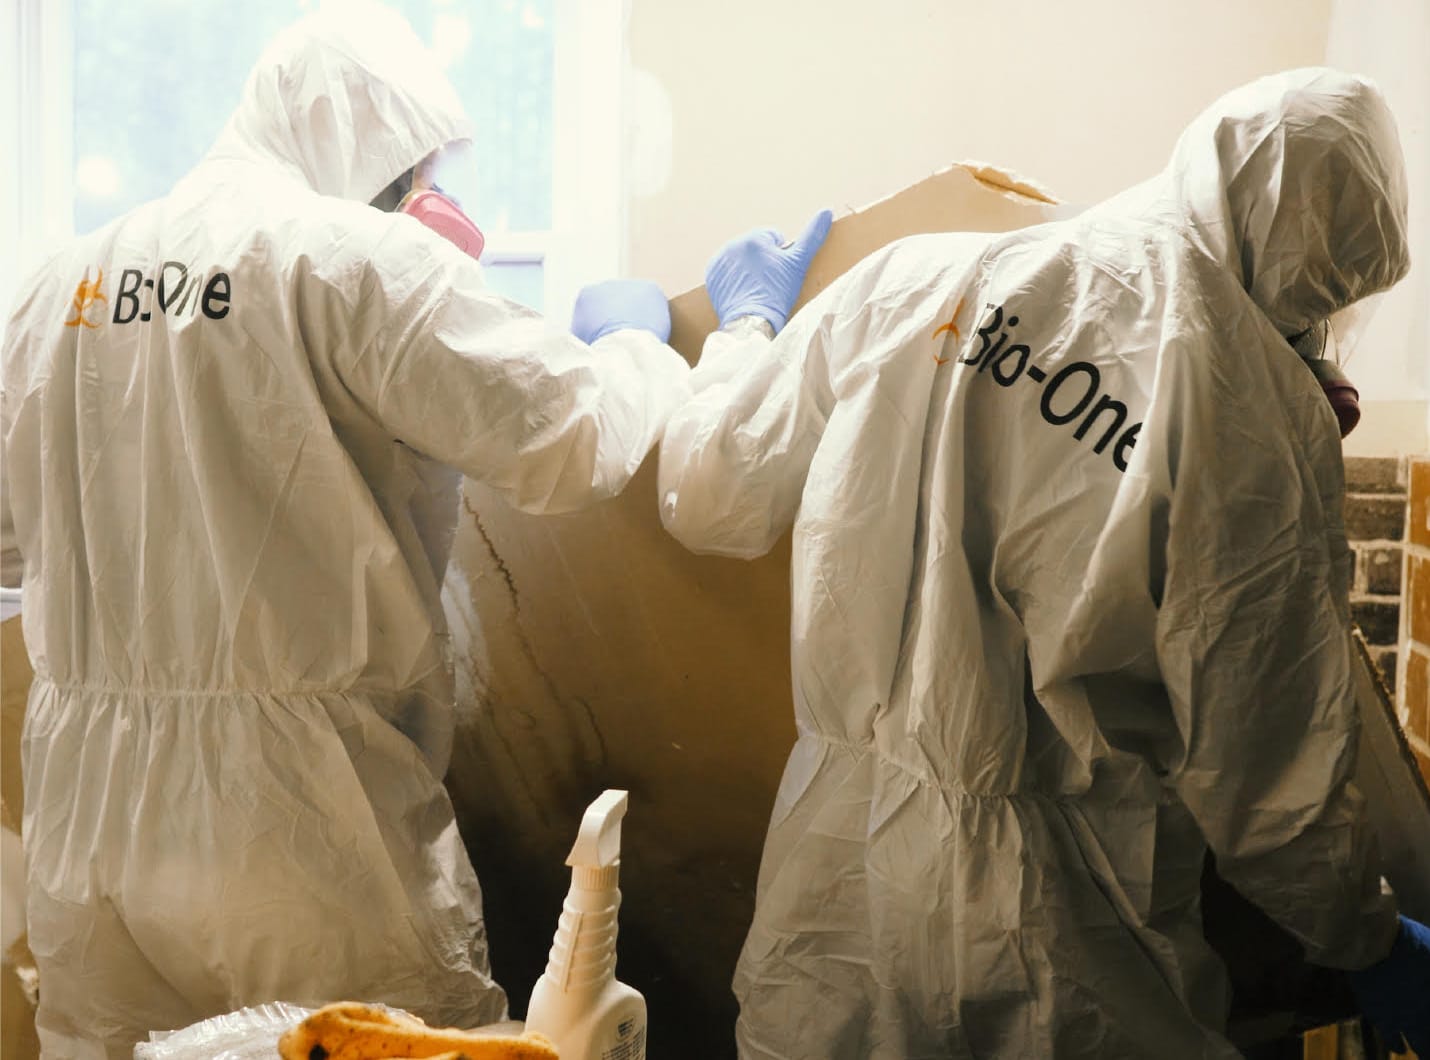 Death, Crime Scene, Biohazard & Hoarding Clean Up Services for Palm Springs